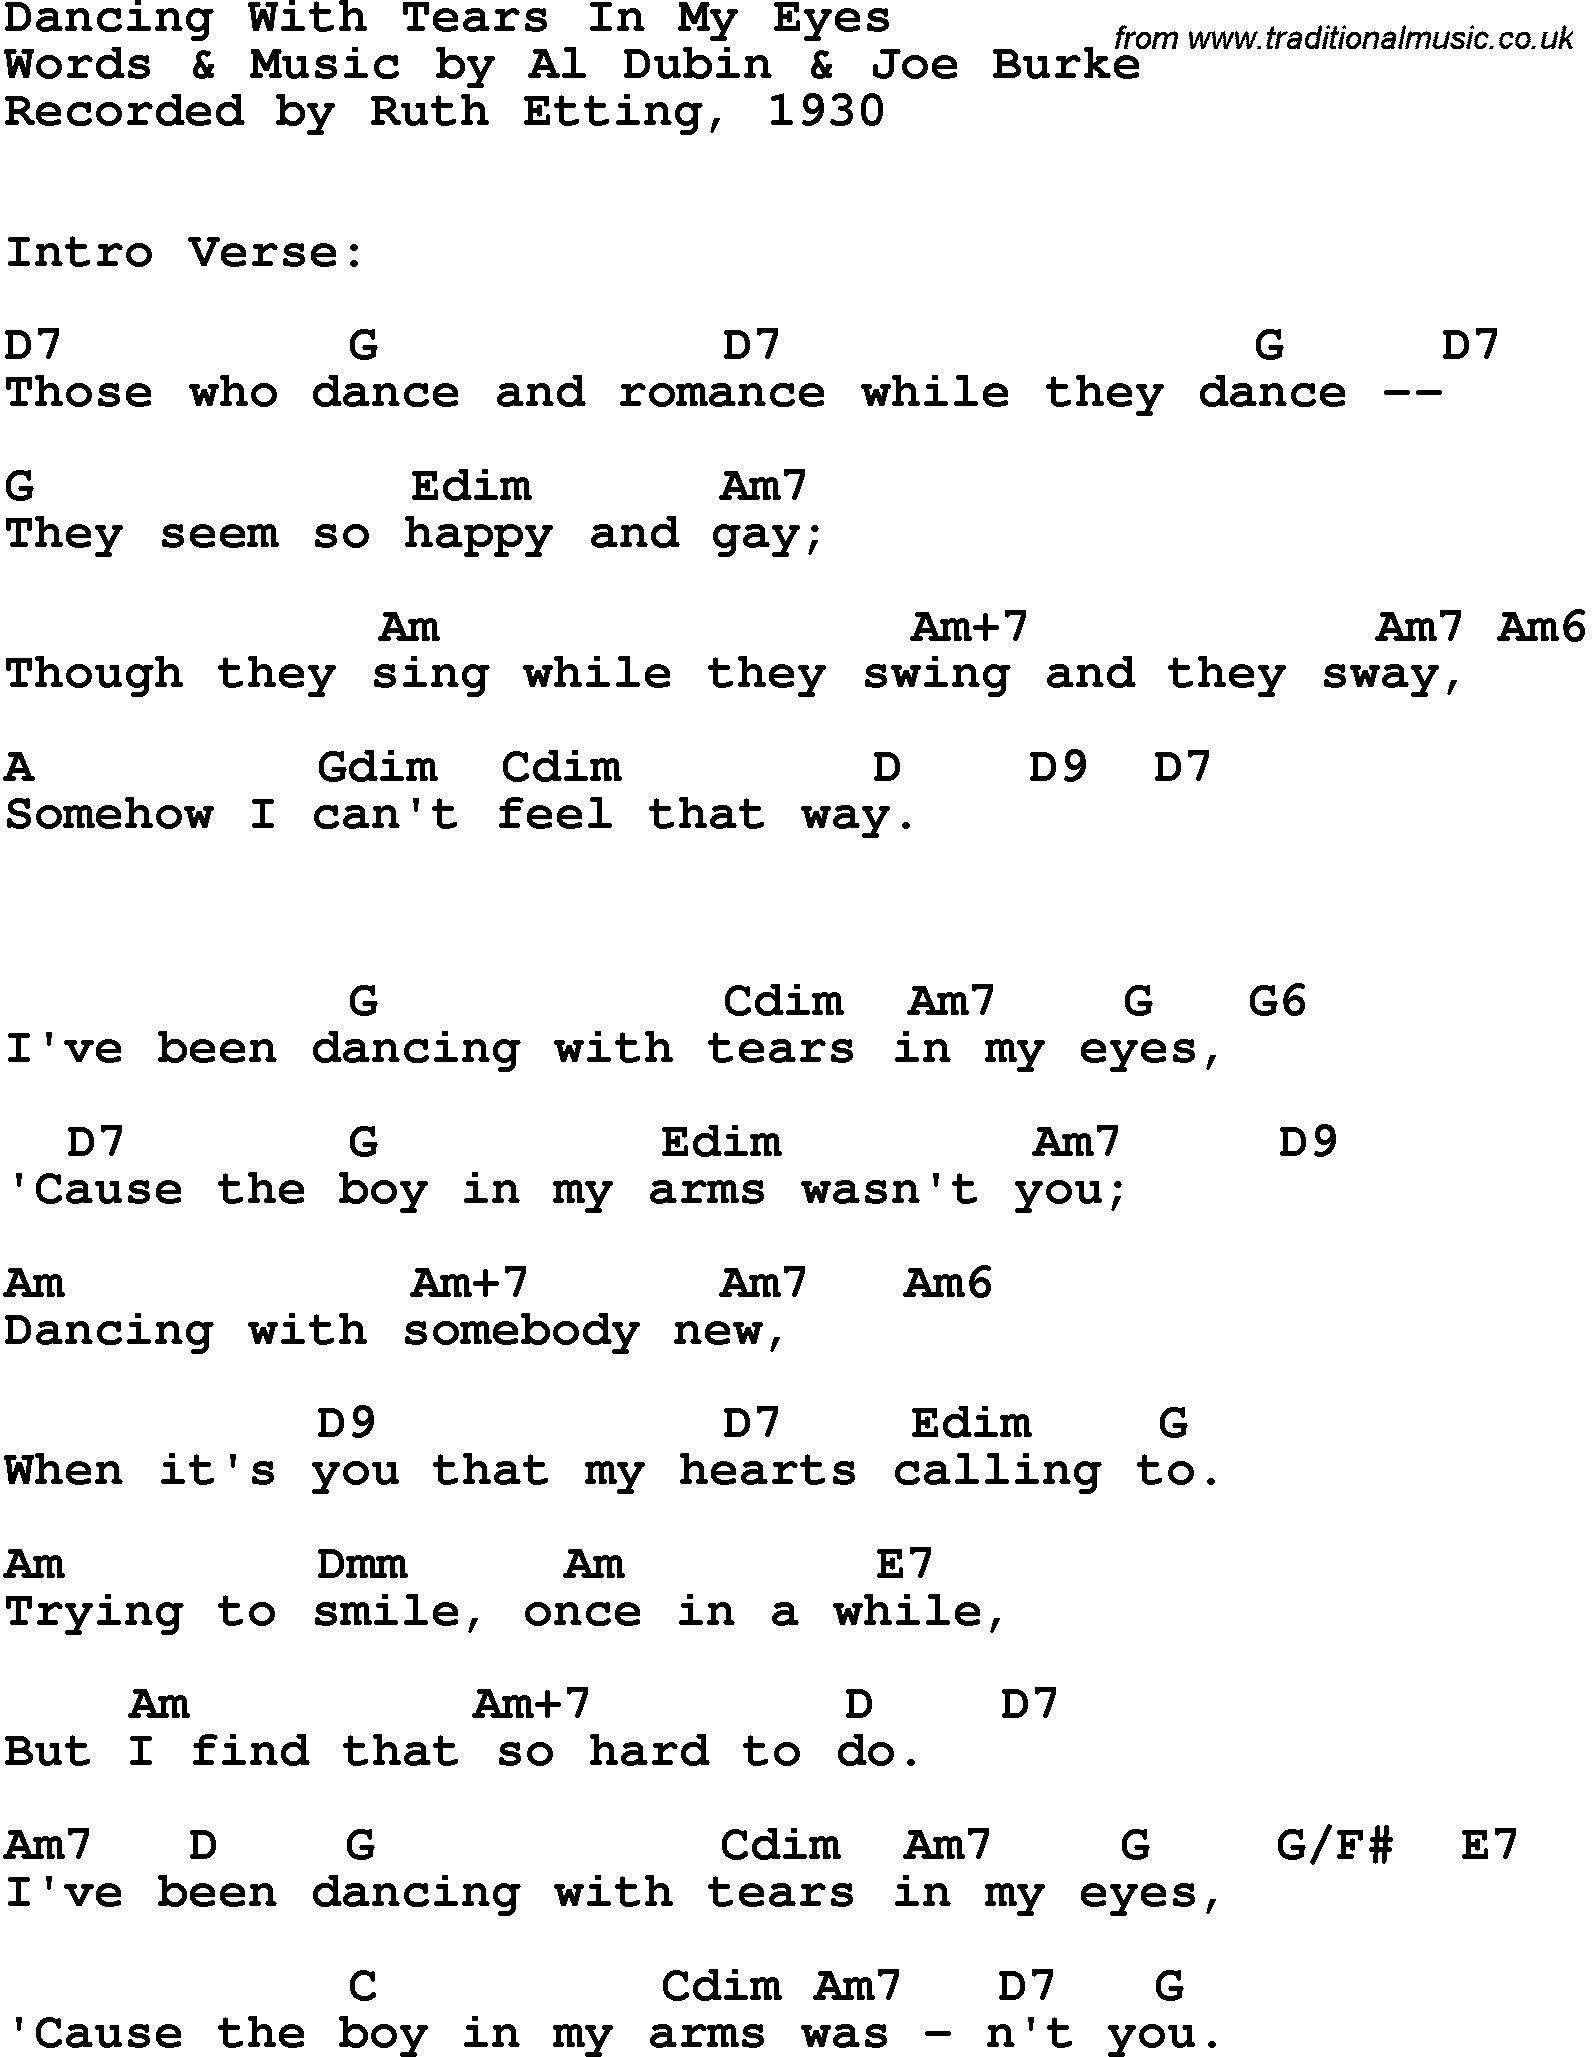 Song Lyrics with guitar chords for Dancing With Tears In My Eyes - Ruth Etting, 1930